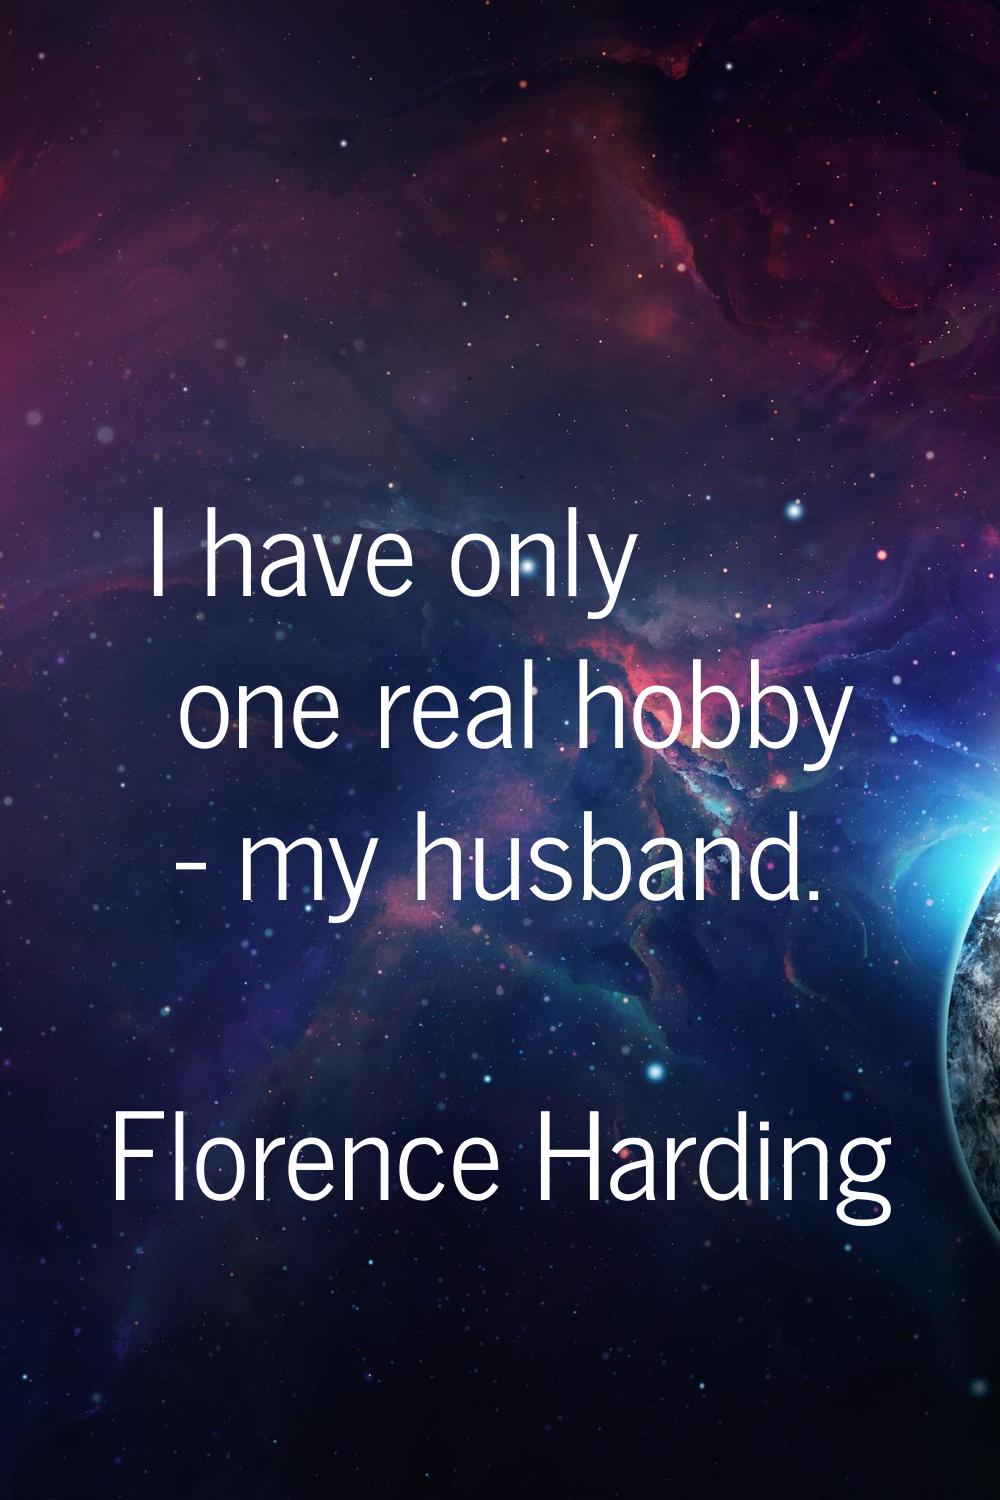 I have only one real hobby - my husband.